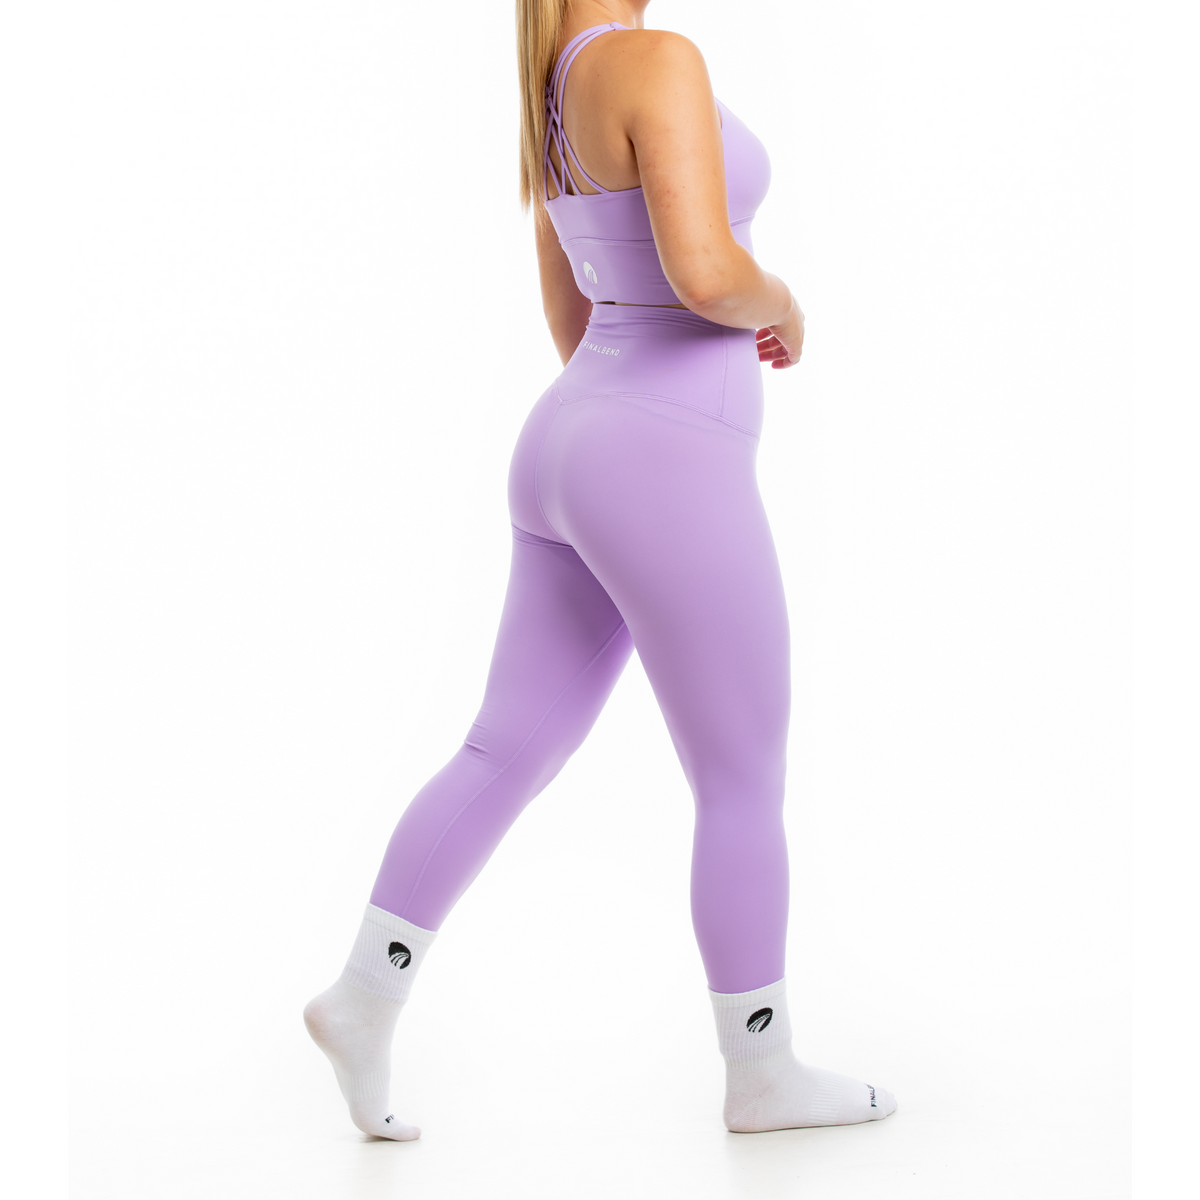 Alphalete Revival Leggings Lilac Purple Size XS - $38 - From Lucy